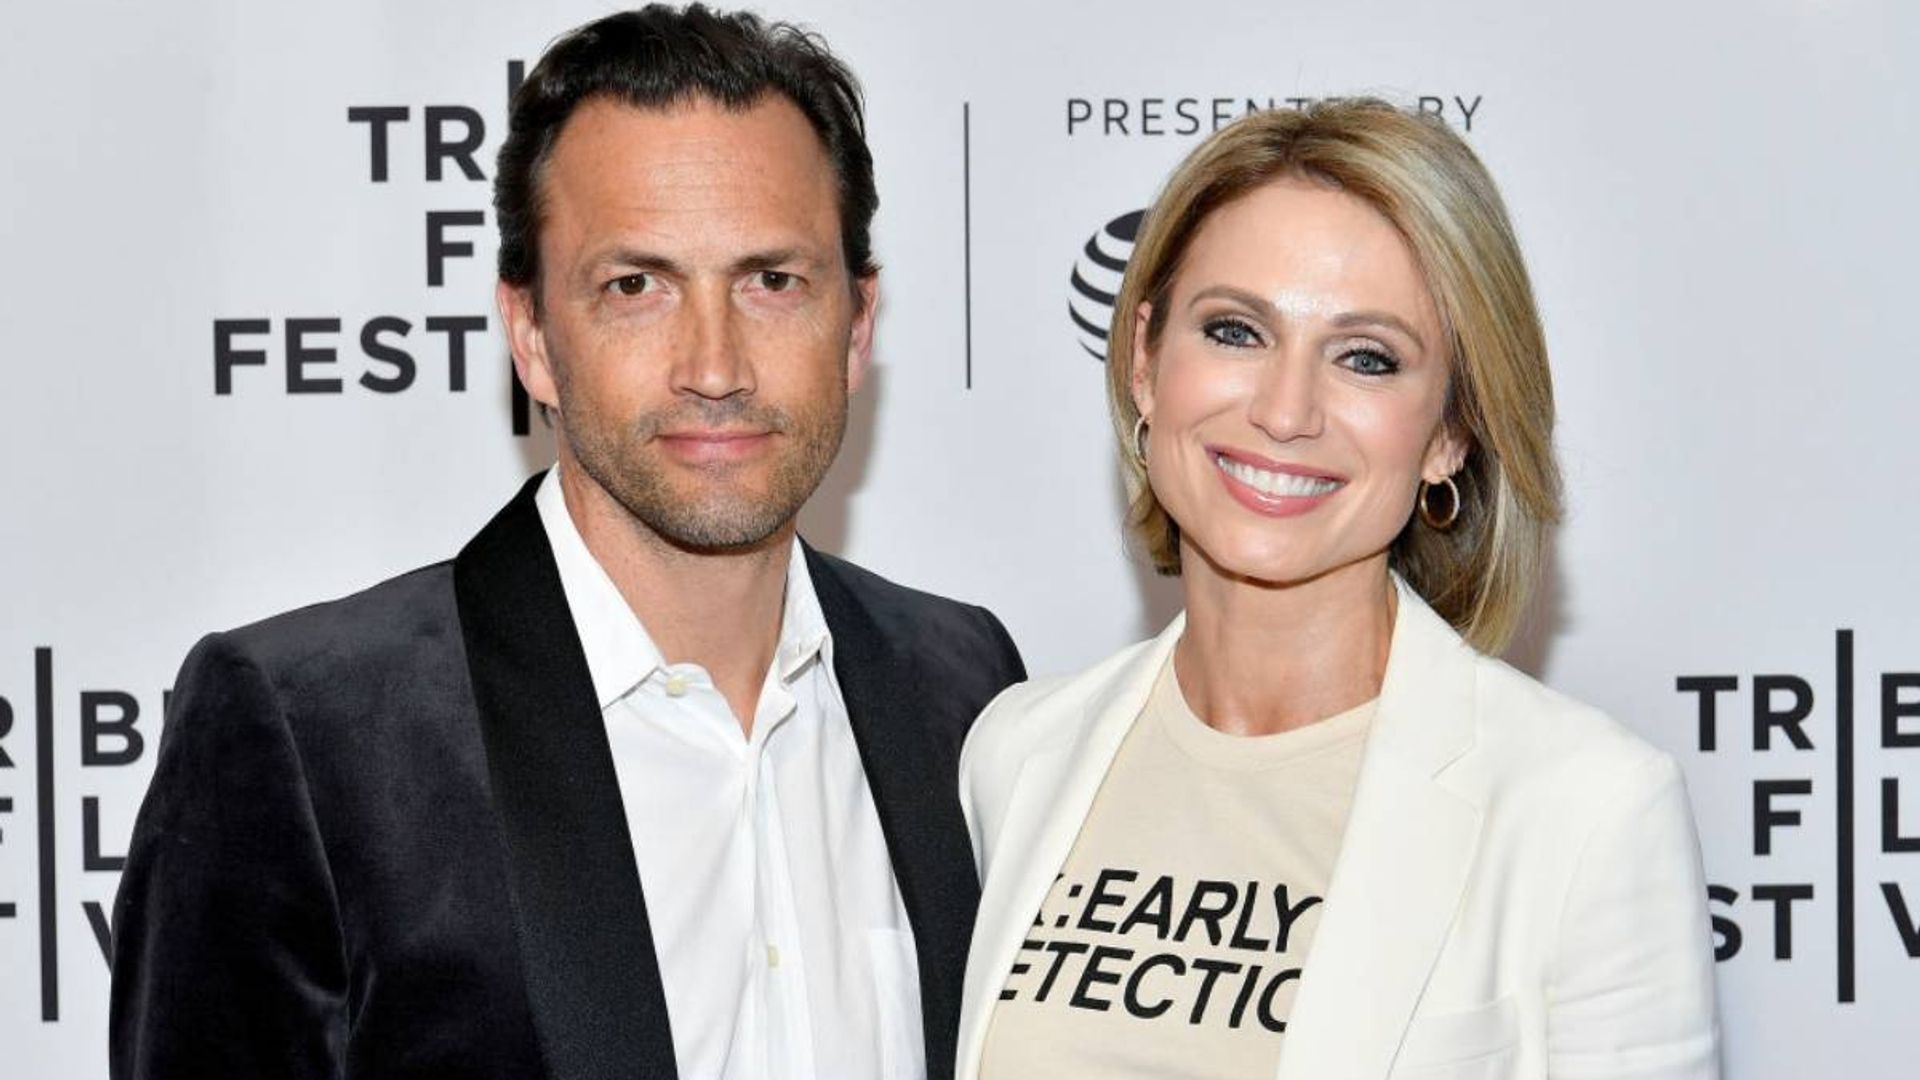 Amy Robach and Andrew Shue at the Tribeca Film Festival